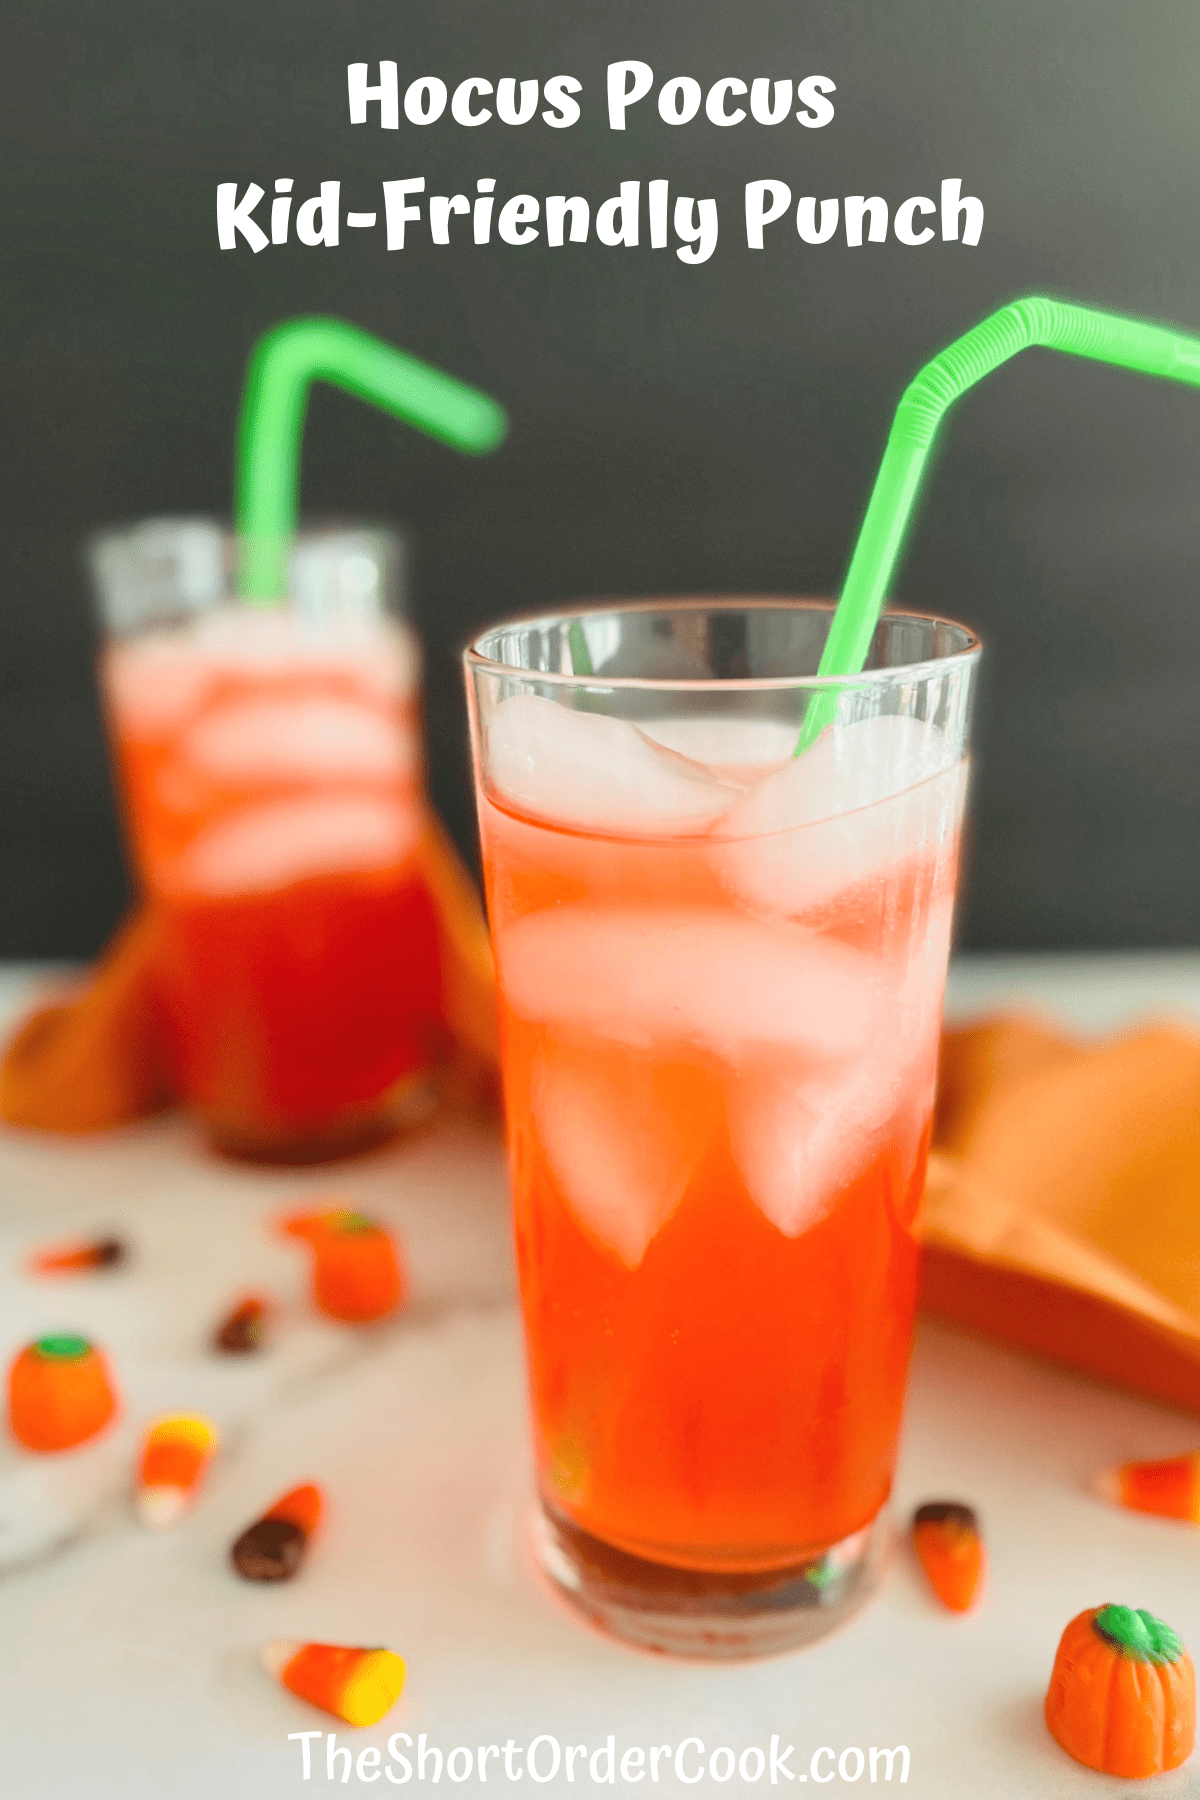 Two glasses filled with red punch and soda for a Hocus Pocus movie themed Halloween drink.